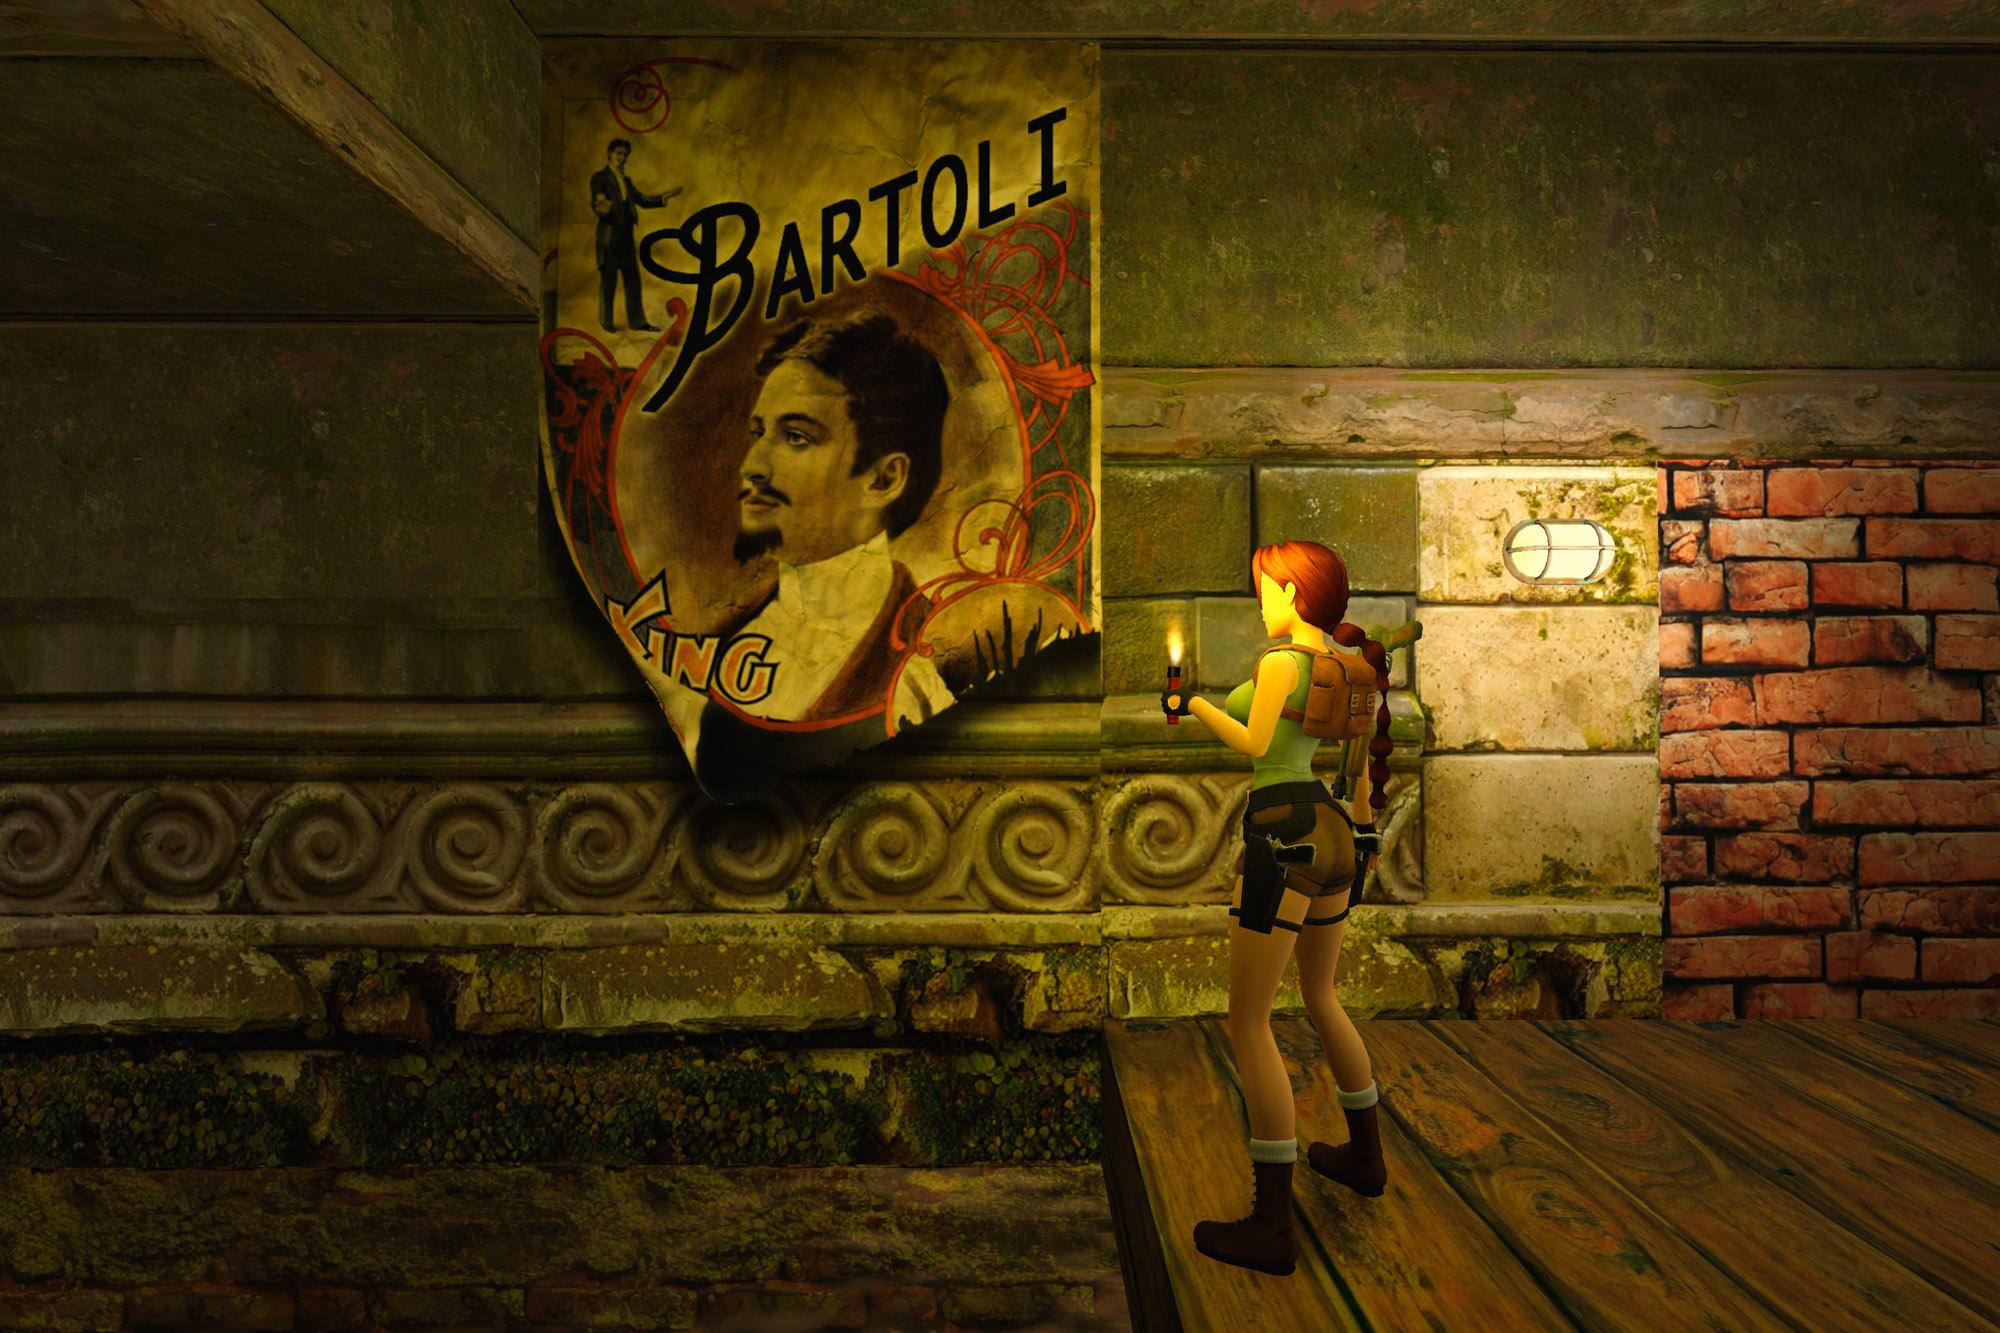 Lara with a lit flare looking at a poster of Gianni Bartoli.